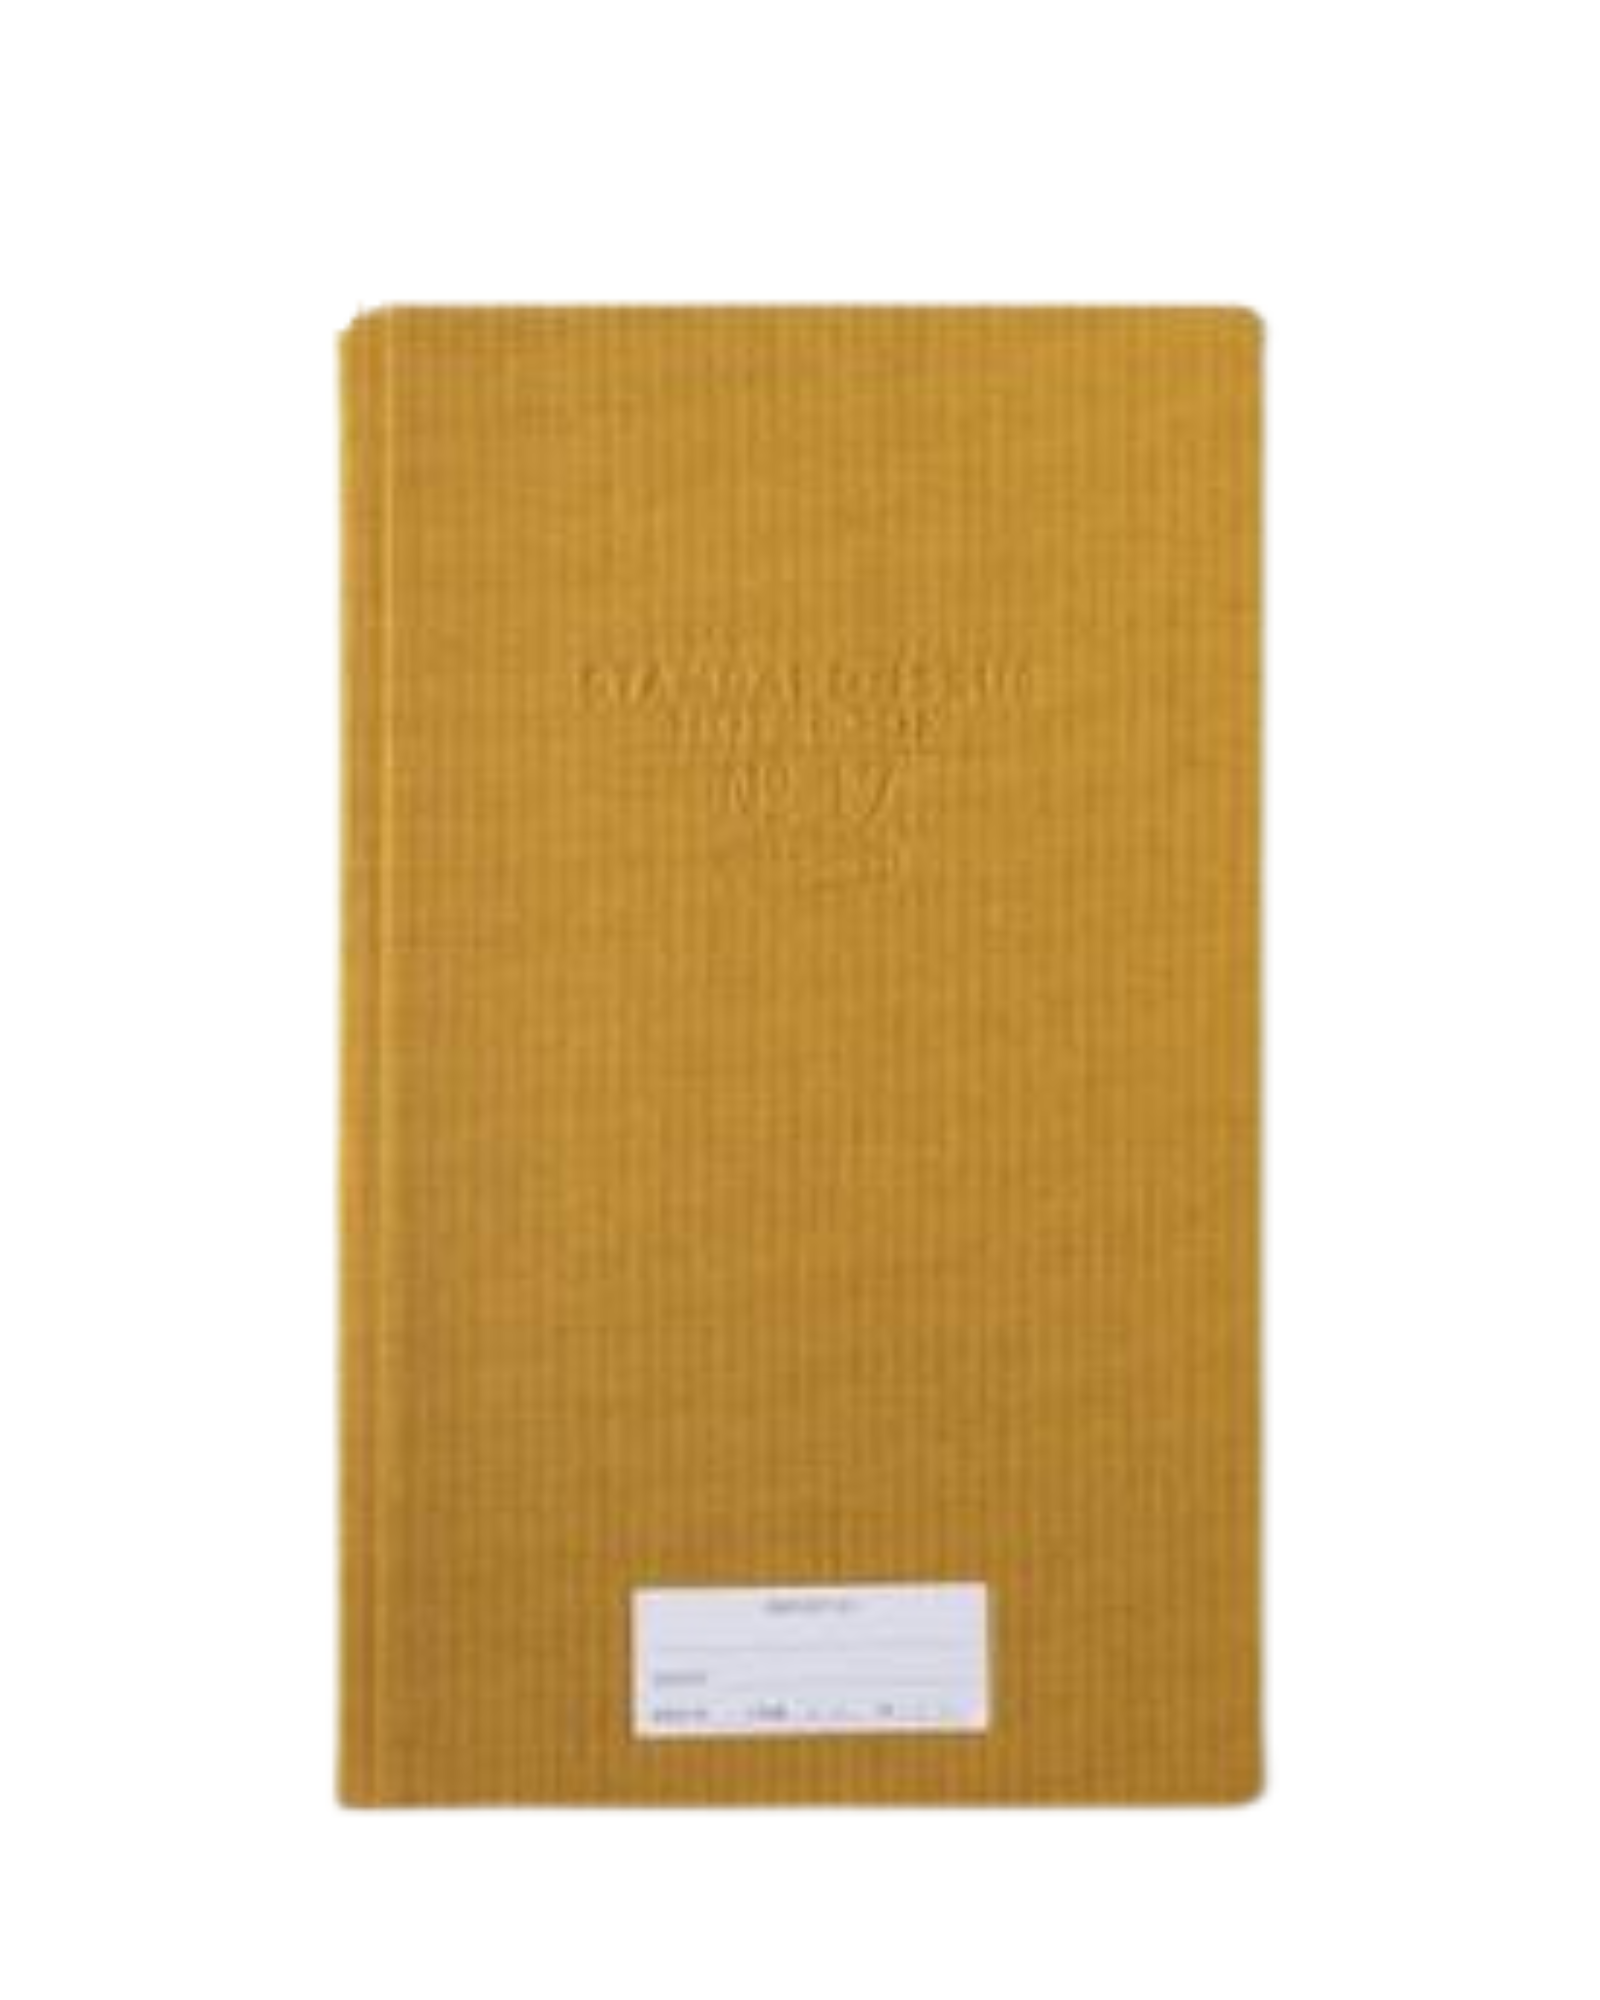 Tall yellow journal with small white label bottom center